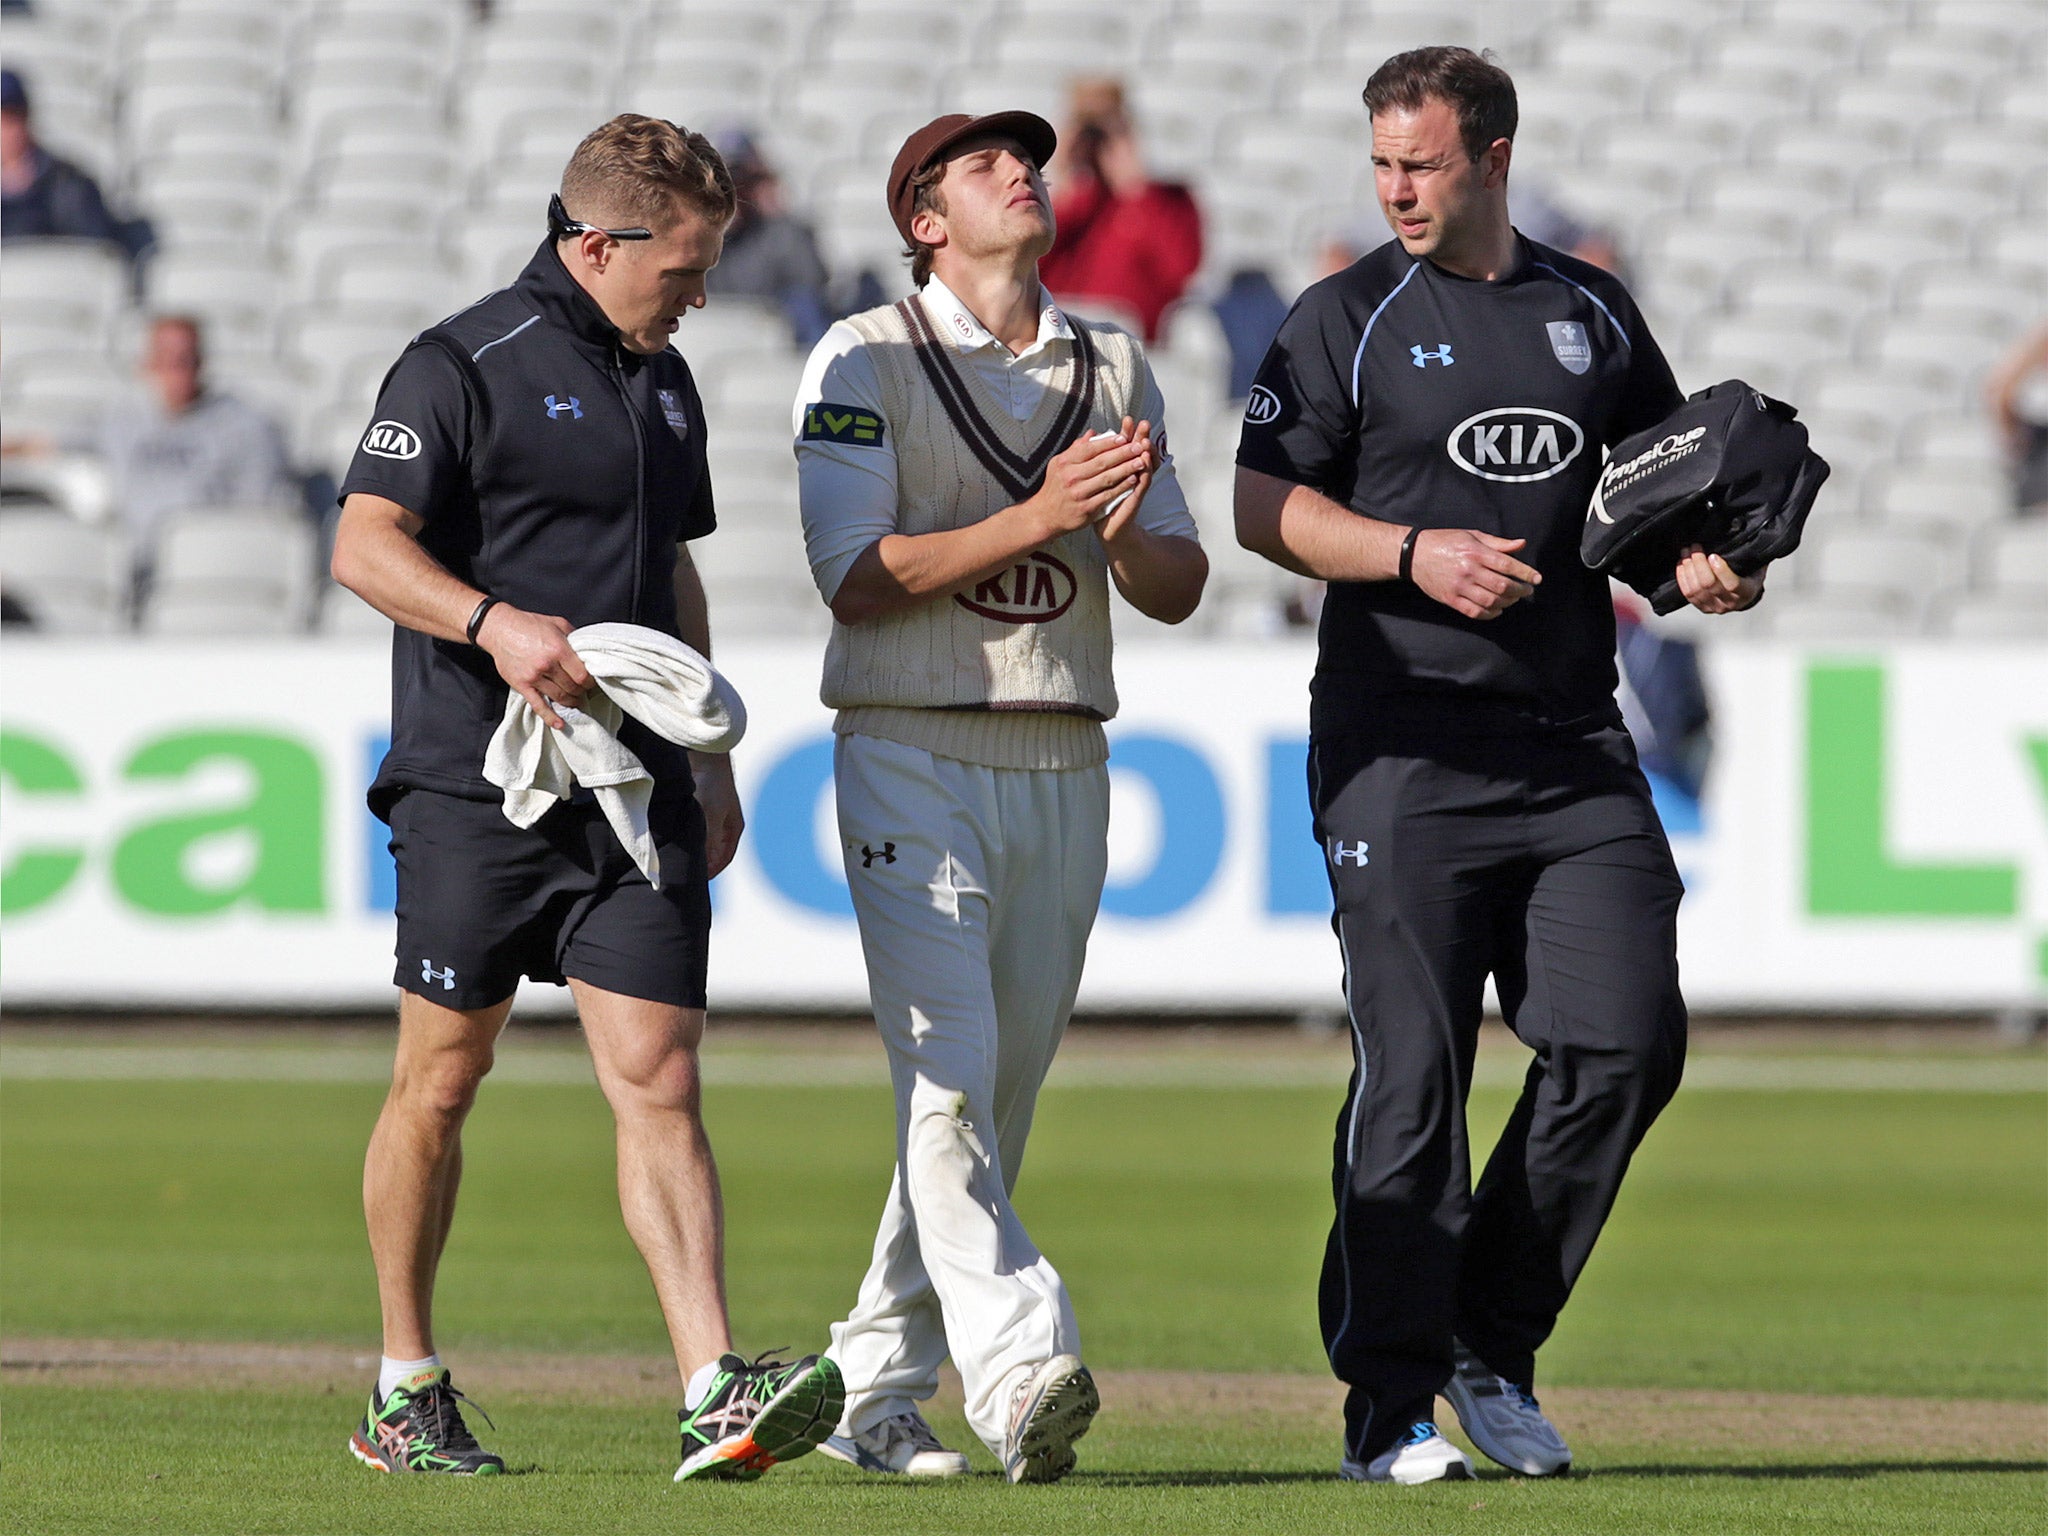 Zafar Ansari suffered an injury scare just after his England call-up, hurting his left thumb playing for Surrey against Lancashire